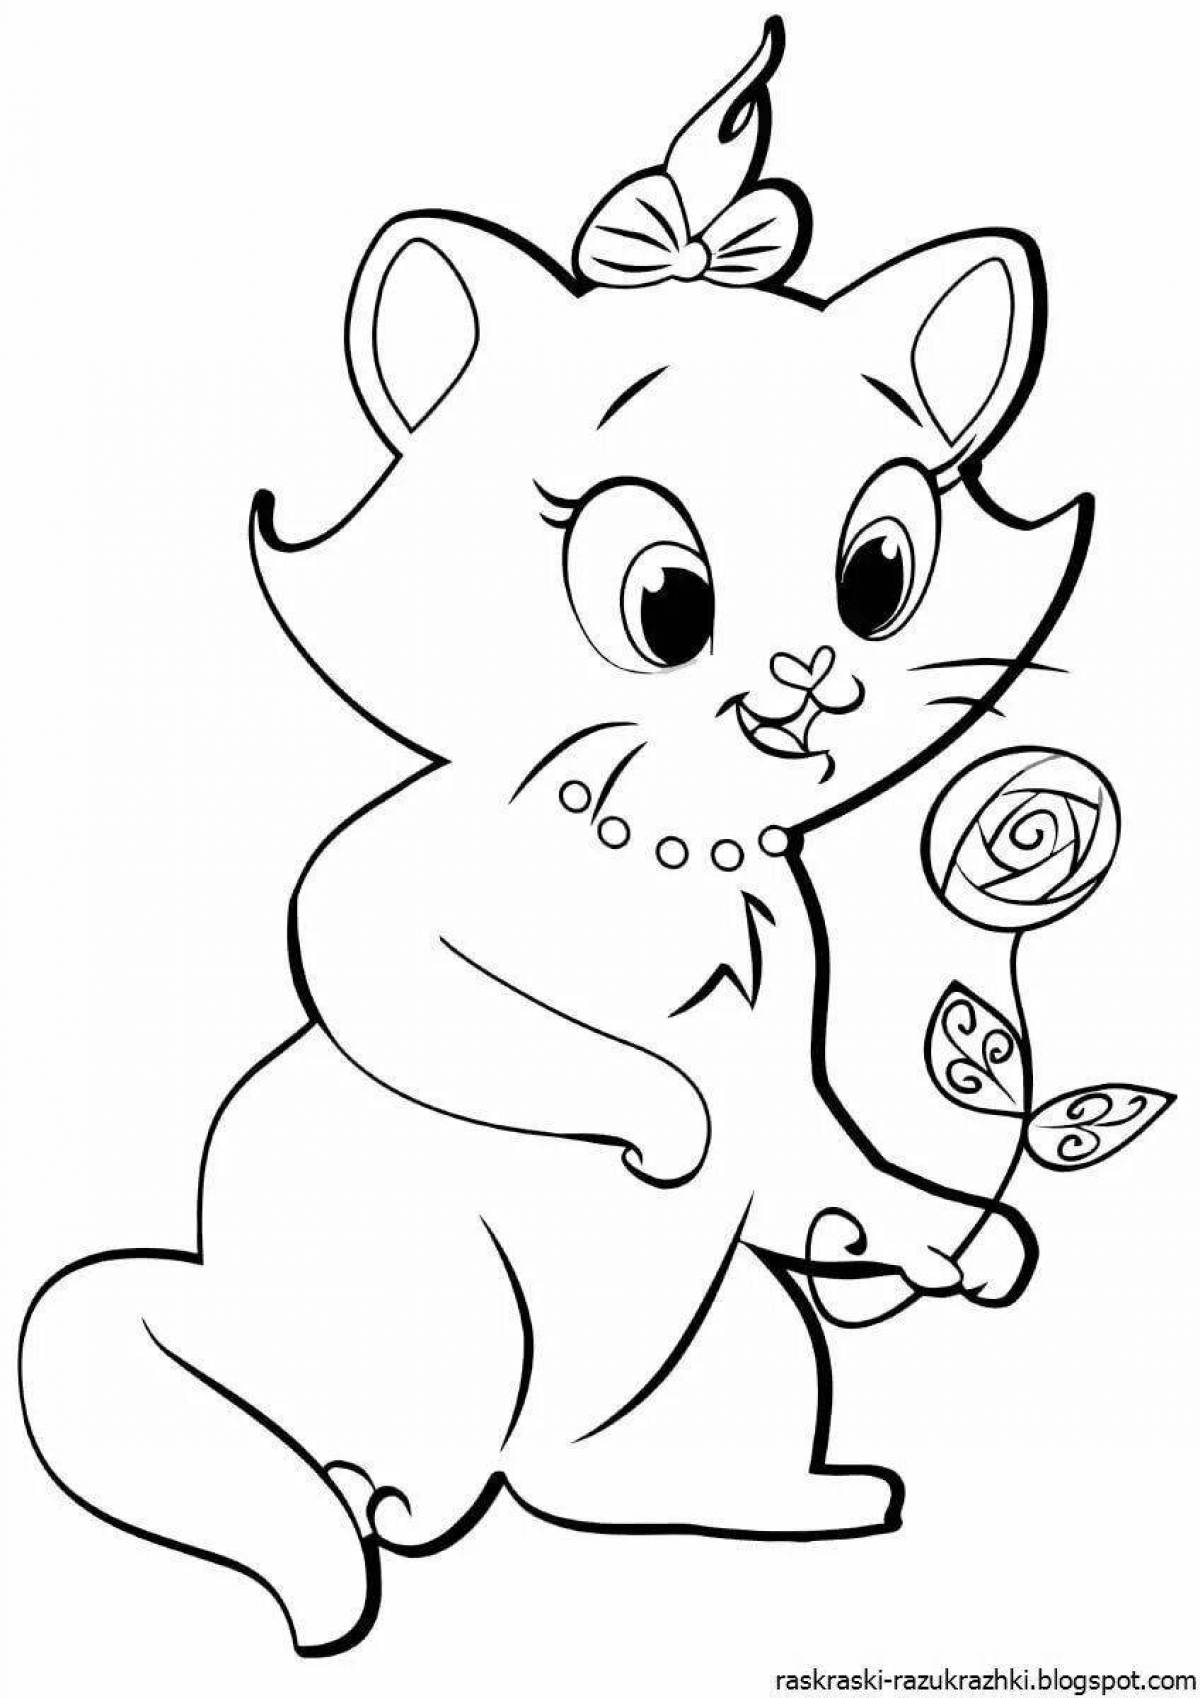 Divine kitty coloring book for 5-6 year olds